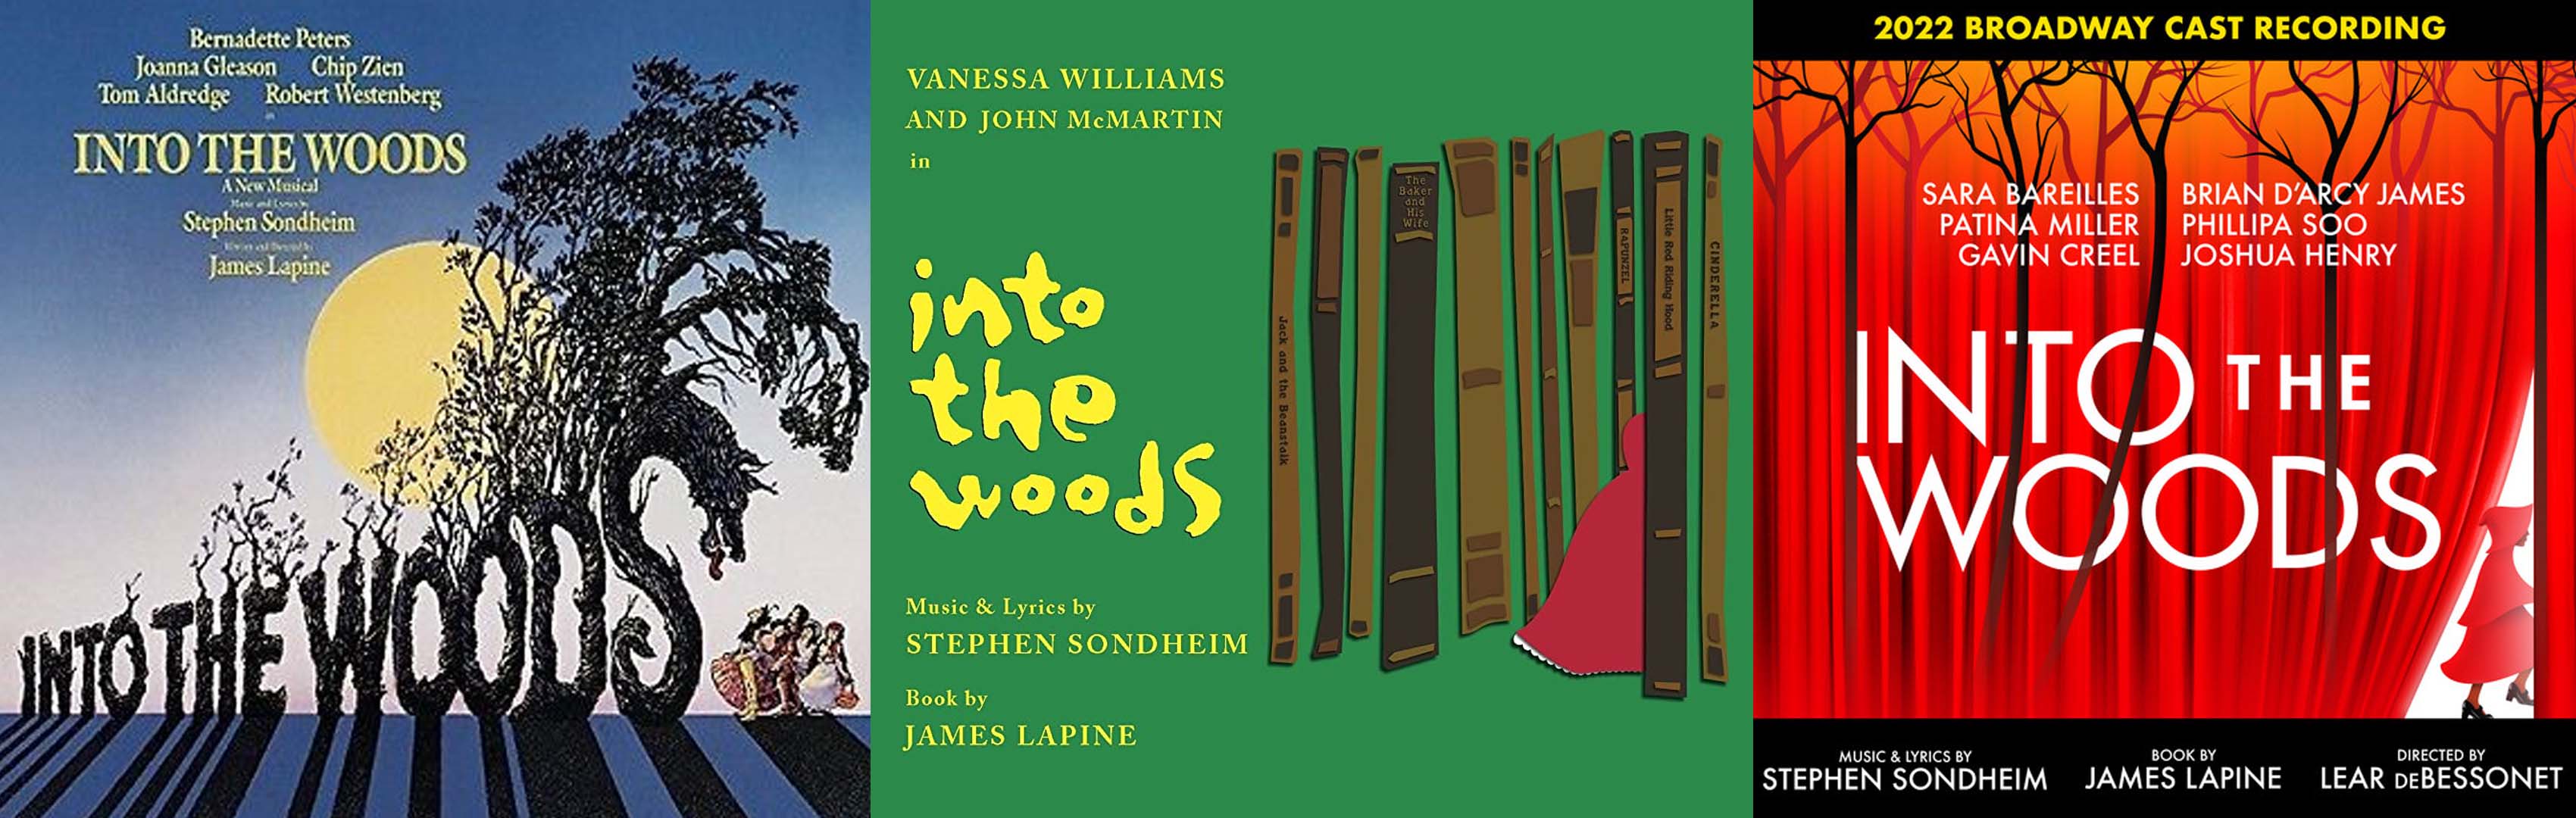 Into the woods - albums.jpg